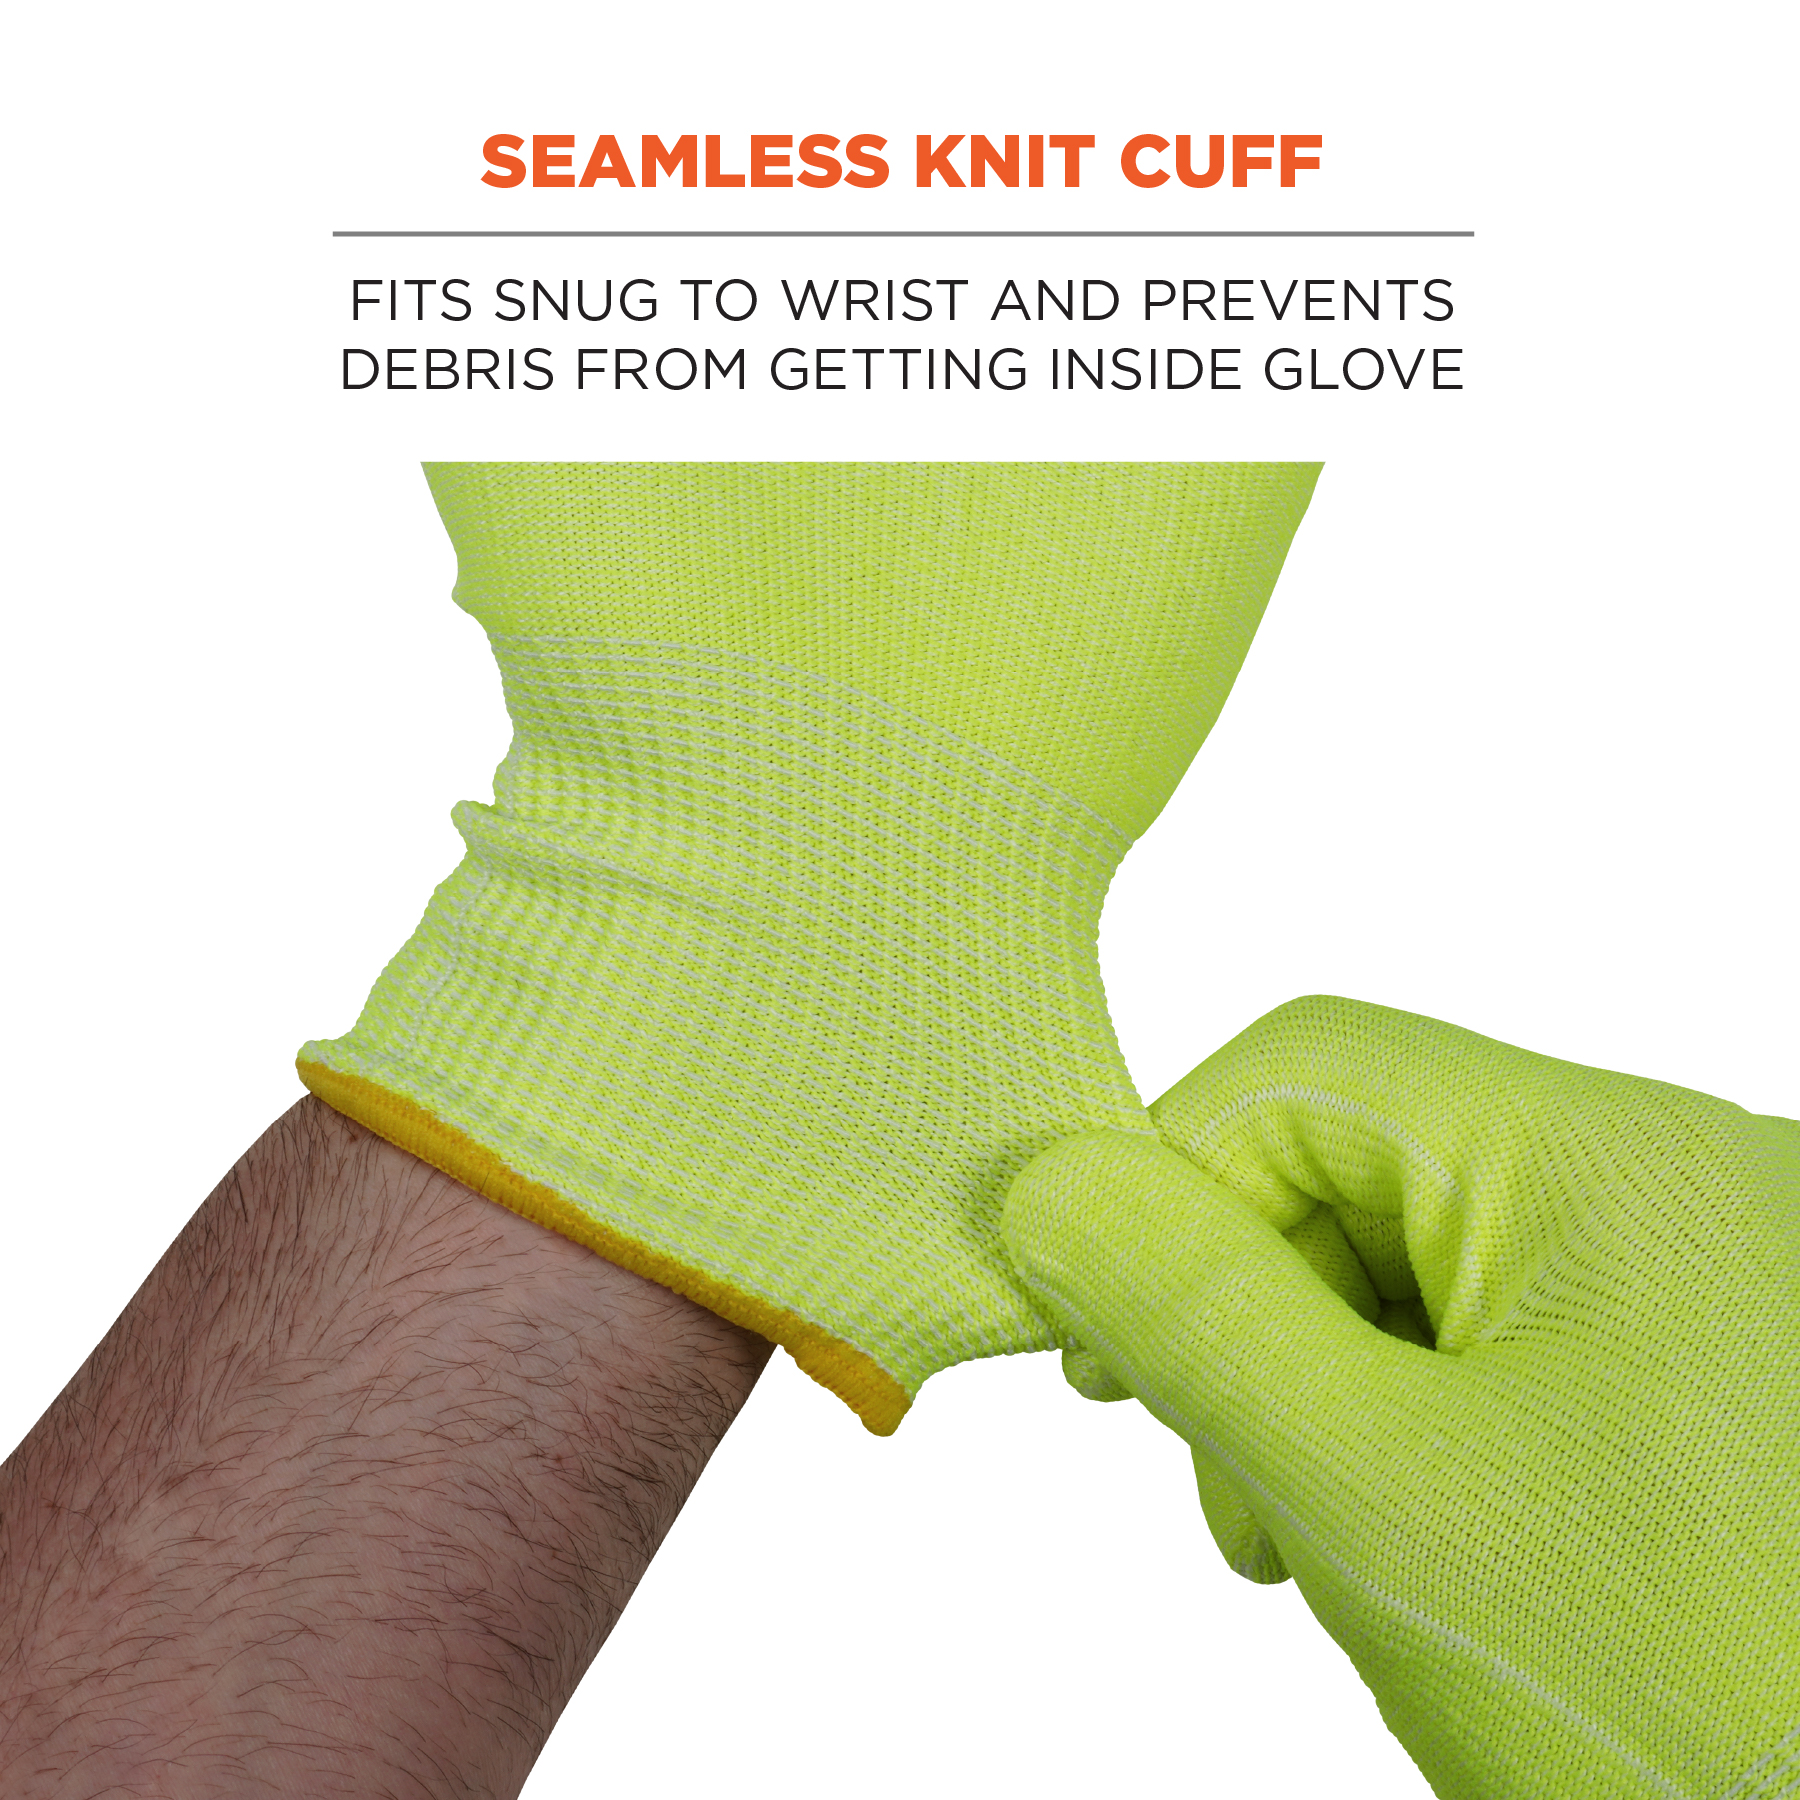 https://www.ergodyne.com/sites/default/files/product-images/18012-7040-cut-resistant-food-grade-gloves-lime-seamless-knit-cuff_0.jpg